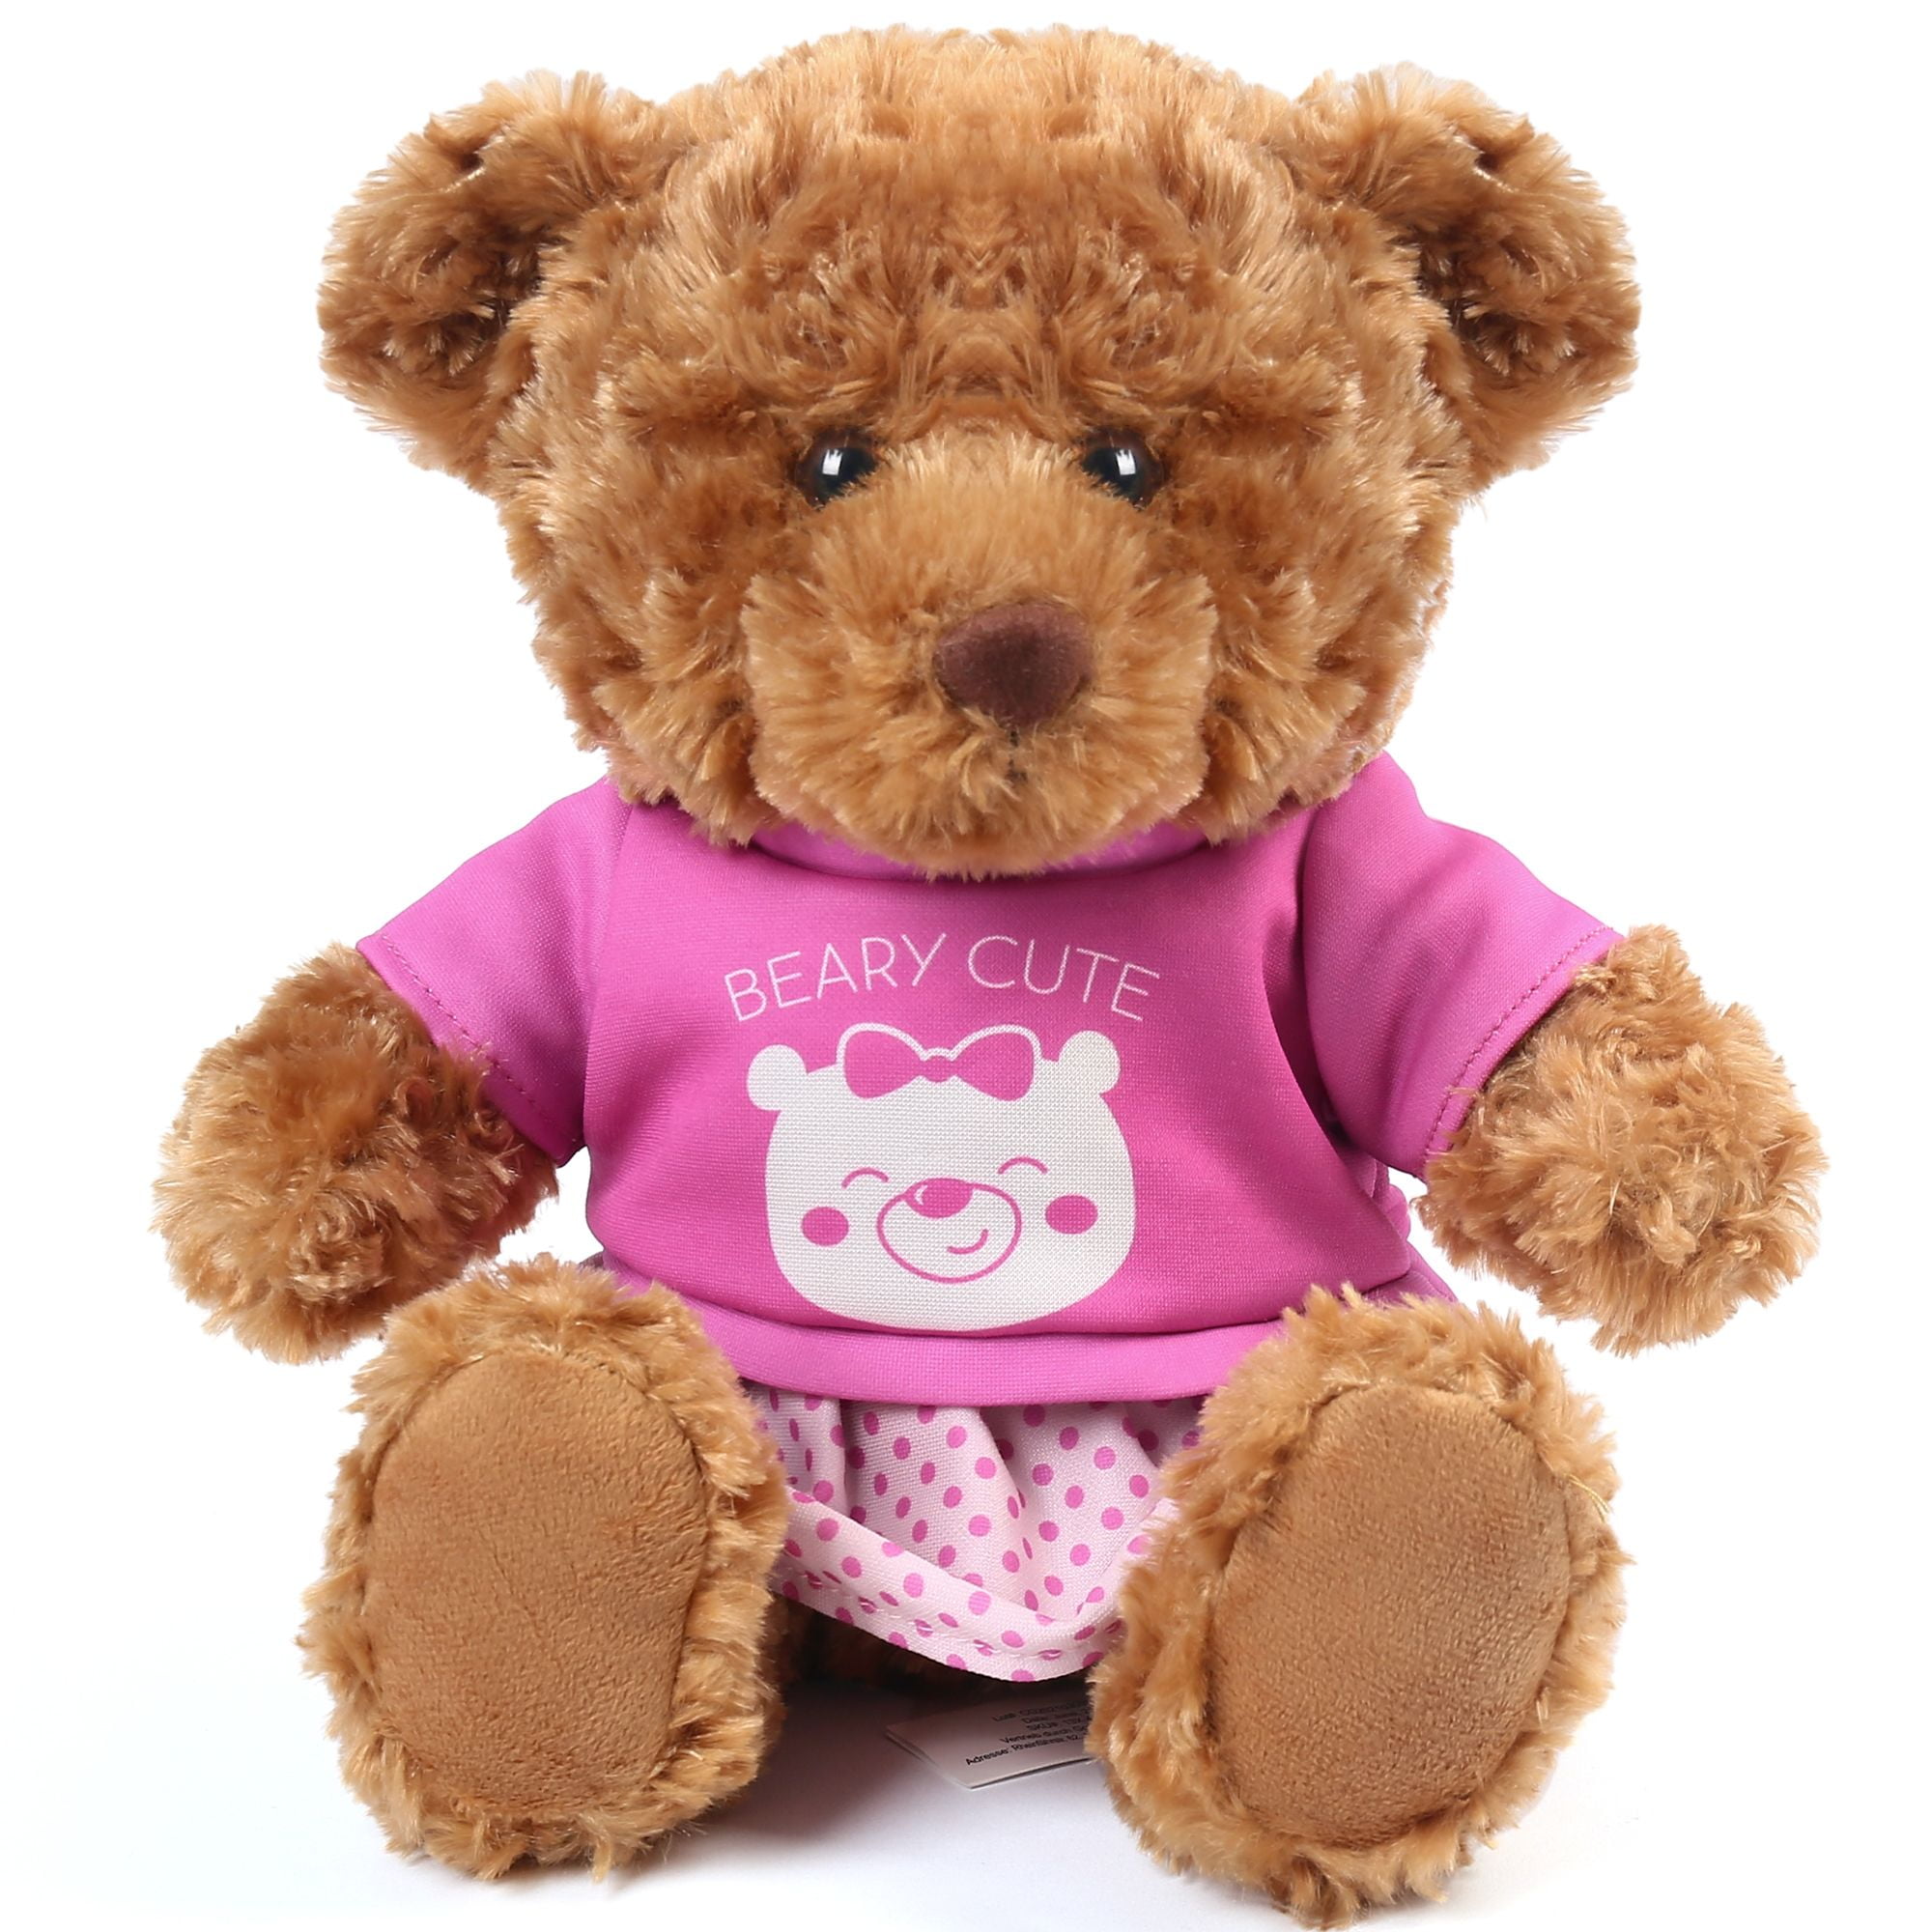 LotFancy 10 in Brown Teddy Bear Stuffed Animal Plush Toy with Clothes for  Kids Girls